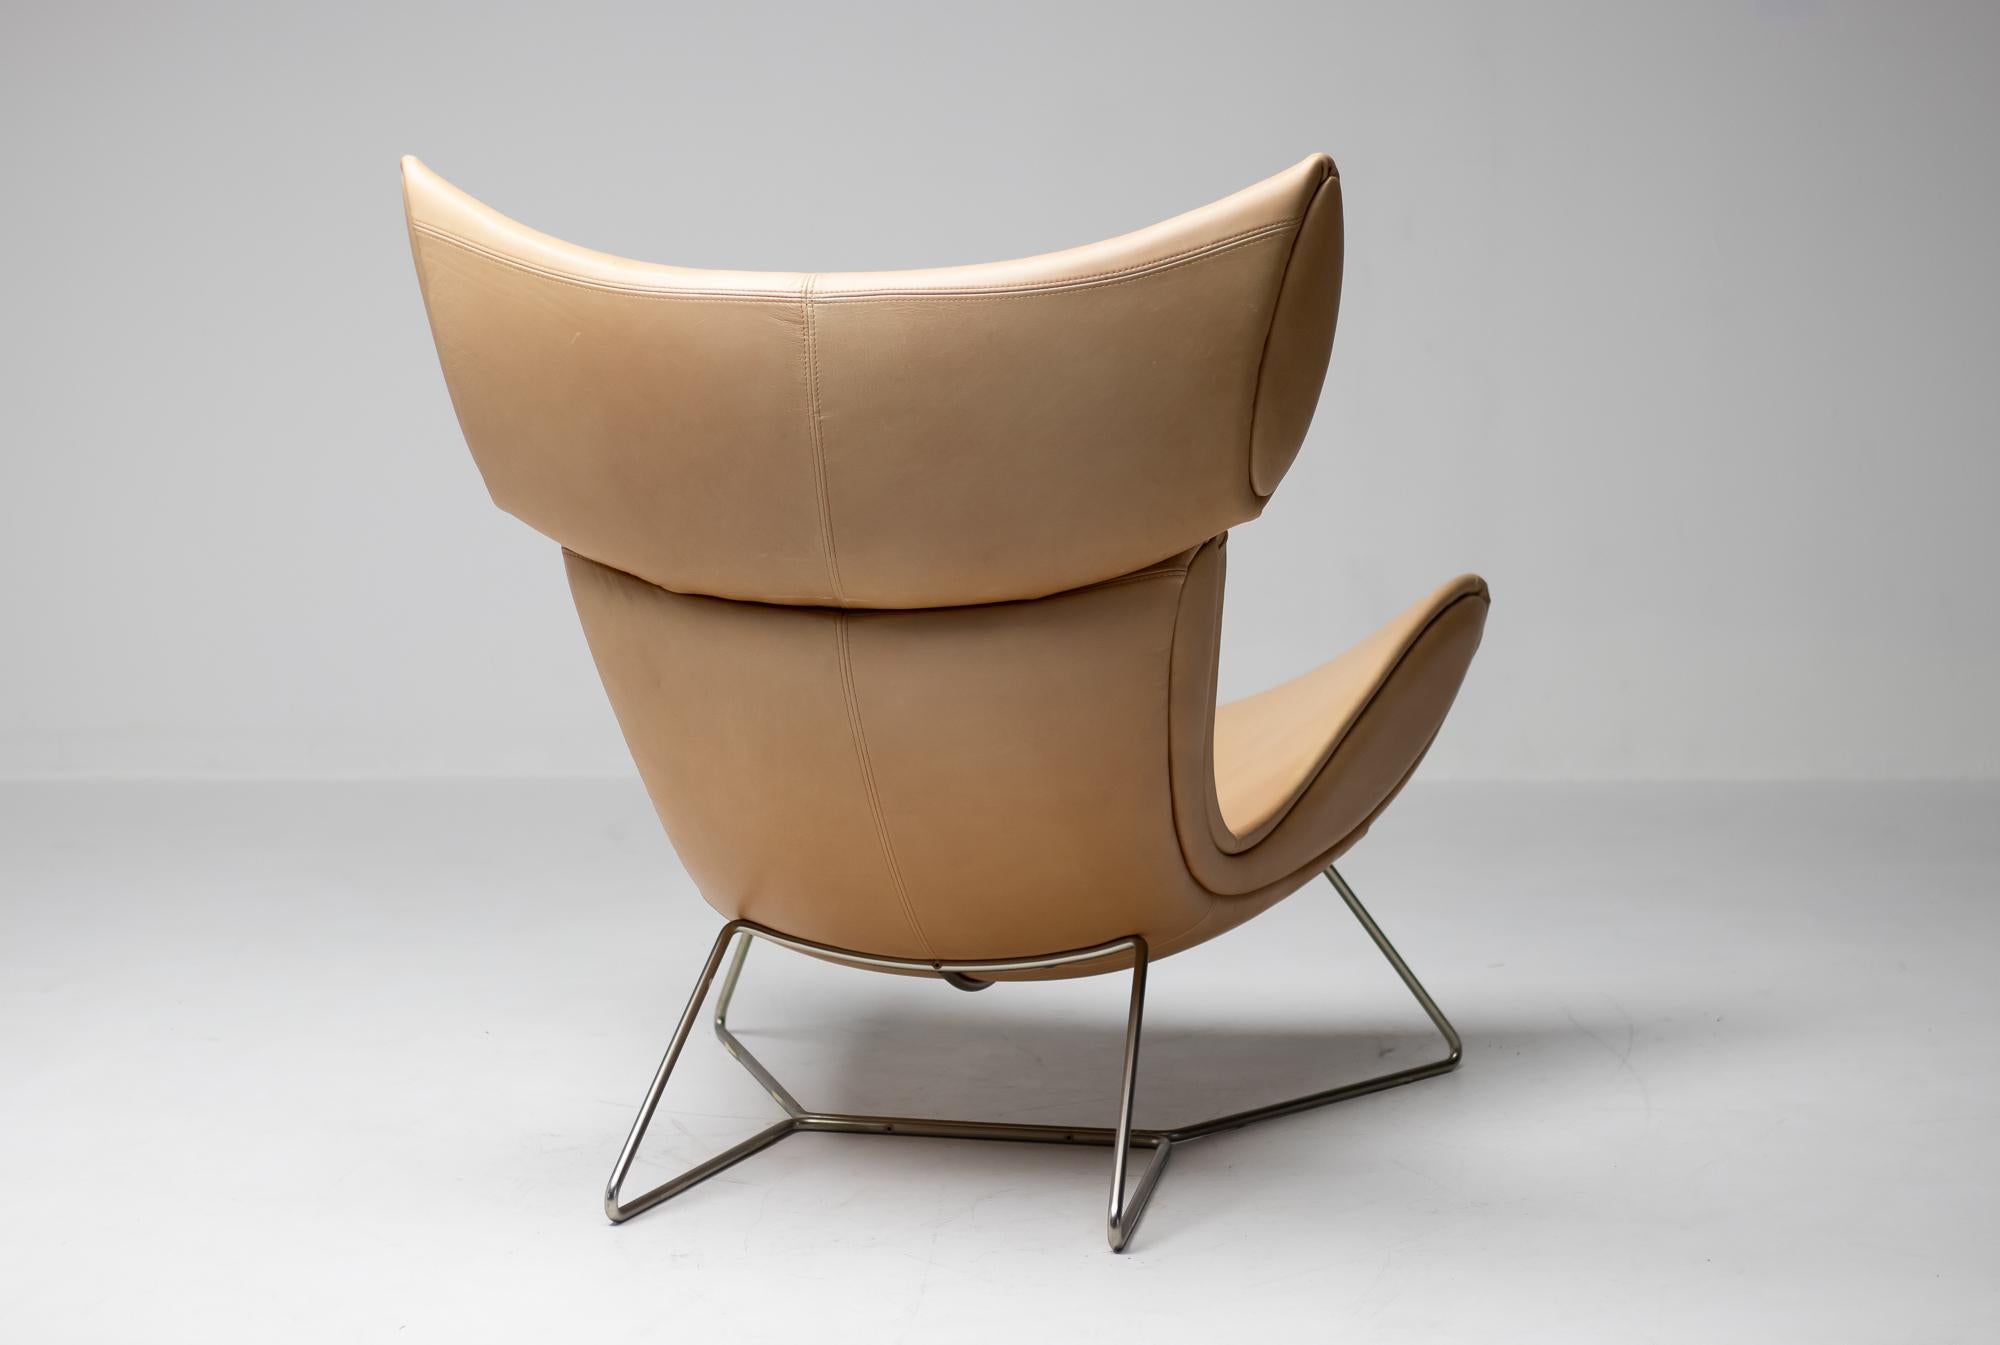 From the striking details to the graceful sweeps of its curves, the Imola armchair is a true design icon. Roomy enough for you to curl up in, yet so elegant it doesn’t seem over the top, the Imola armchair is an instant classic and ready to make a